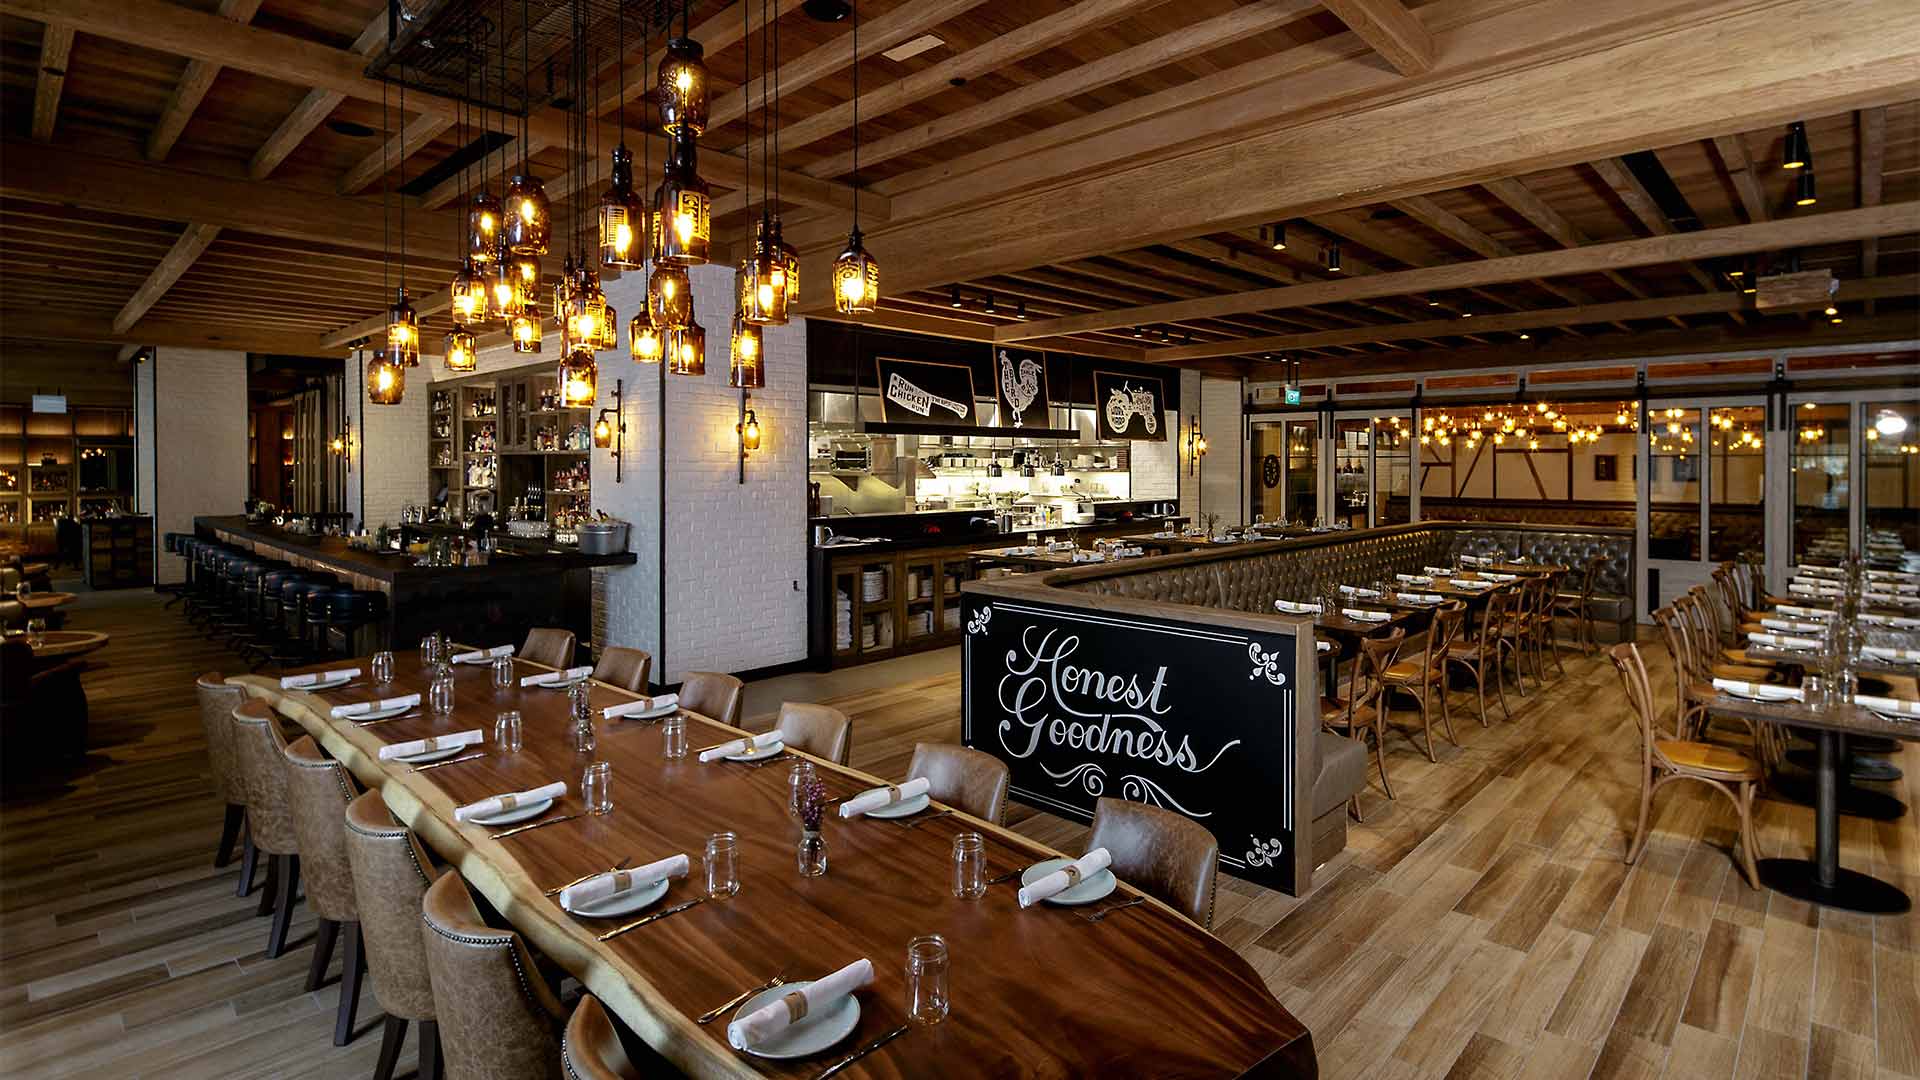 Dining hall at Yardbird, a restaurant at Marina Bay Sands to hold private events and meetings in Singapore